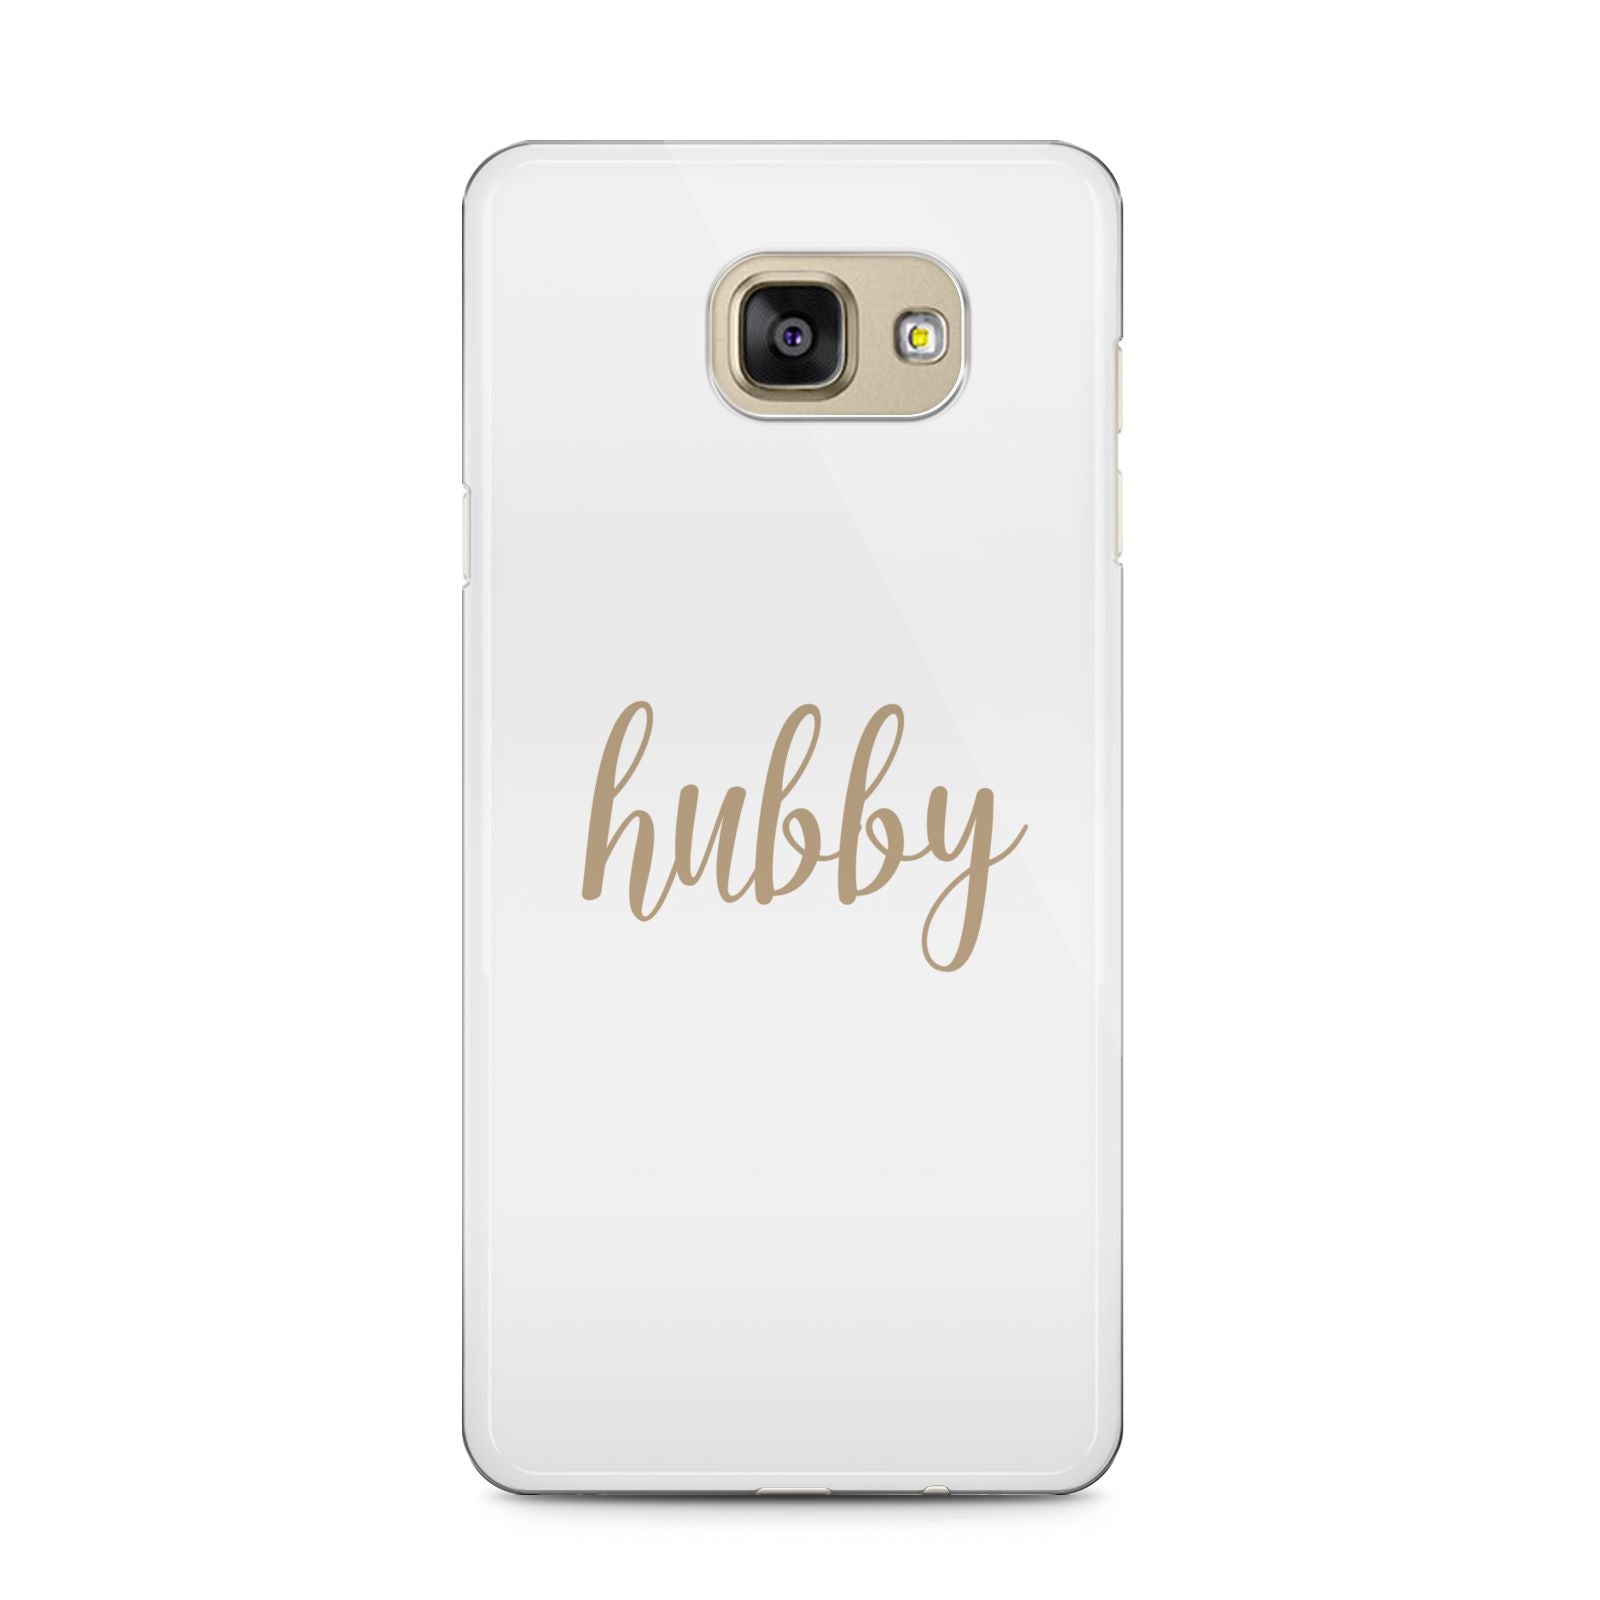 Hubby Samsung Galaxy A5 2016 Case on gold phone